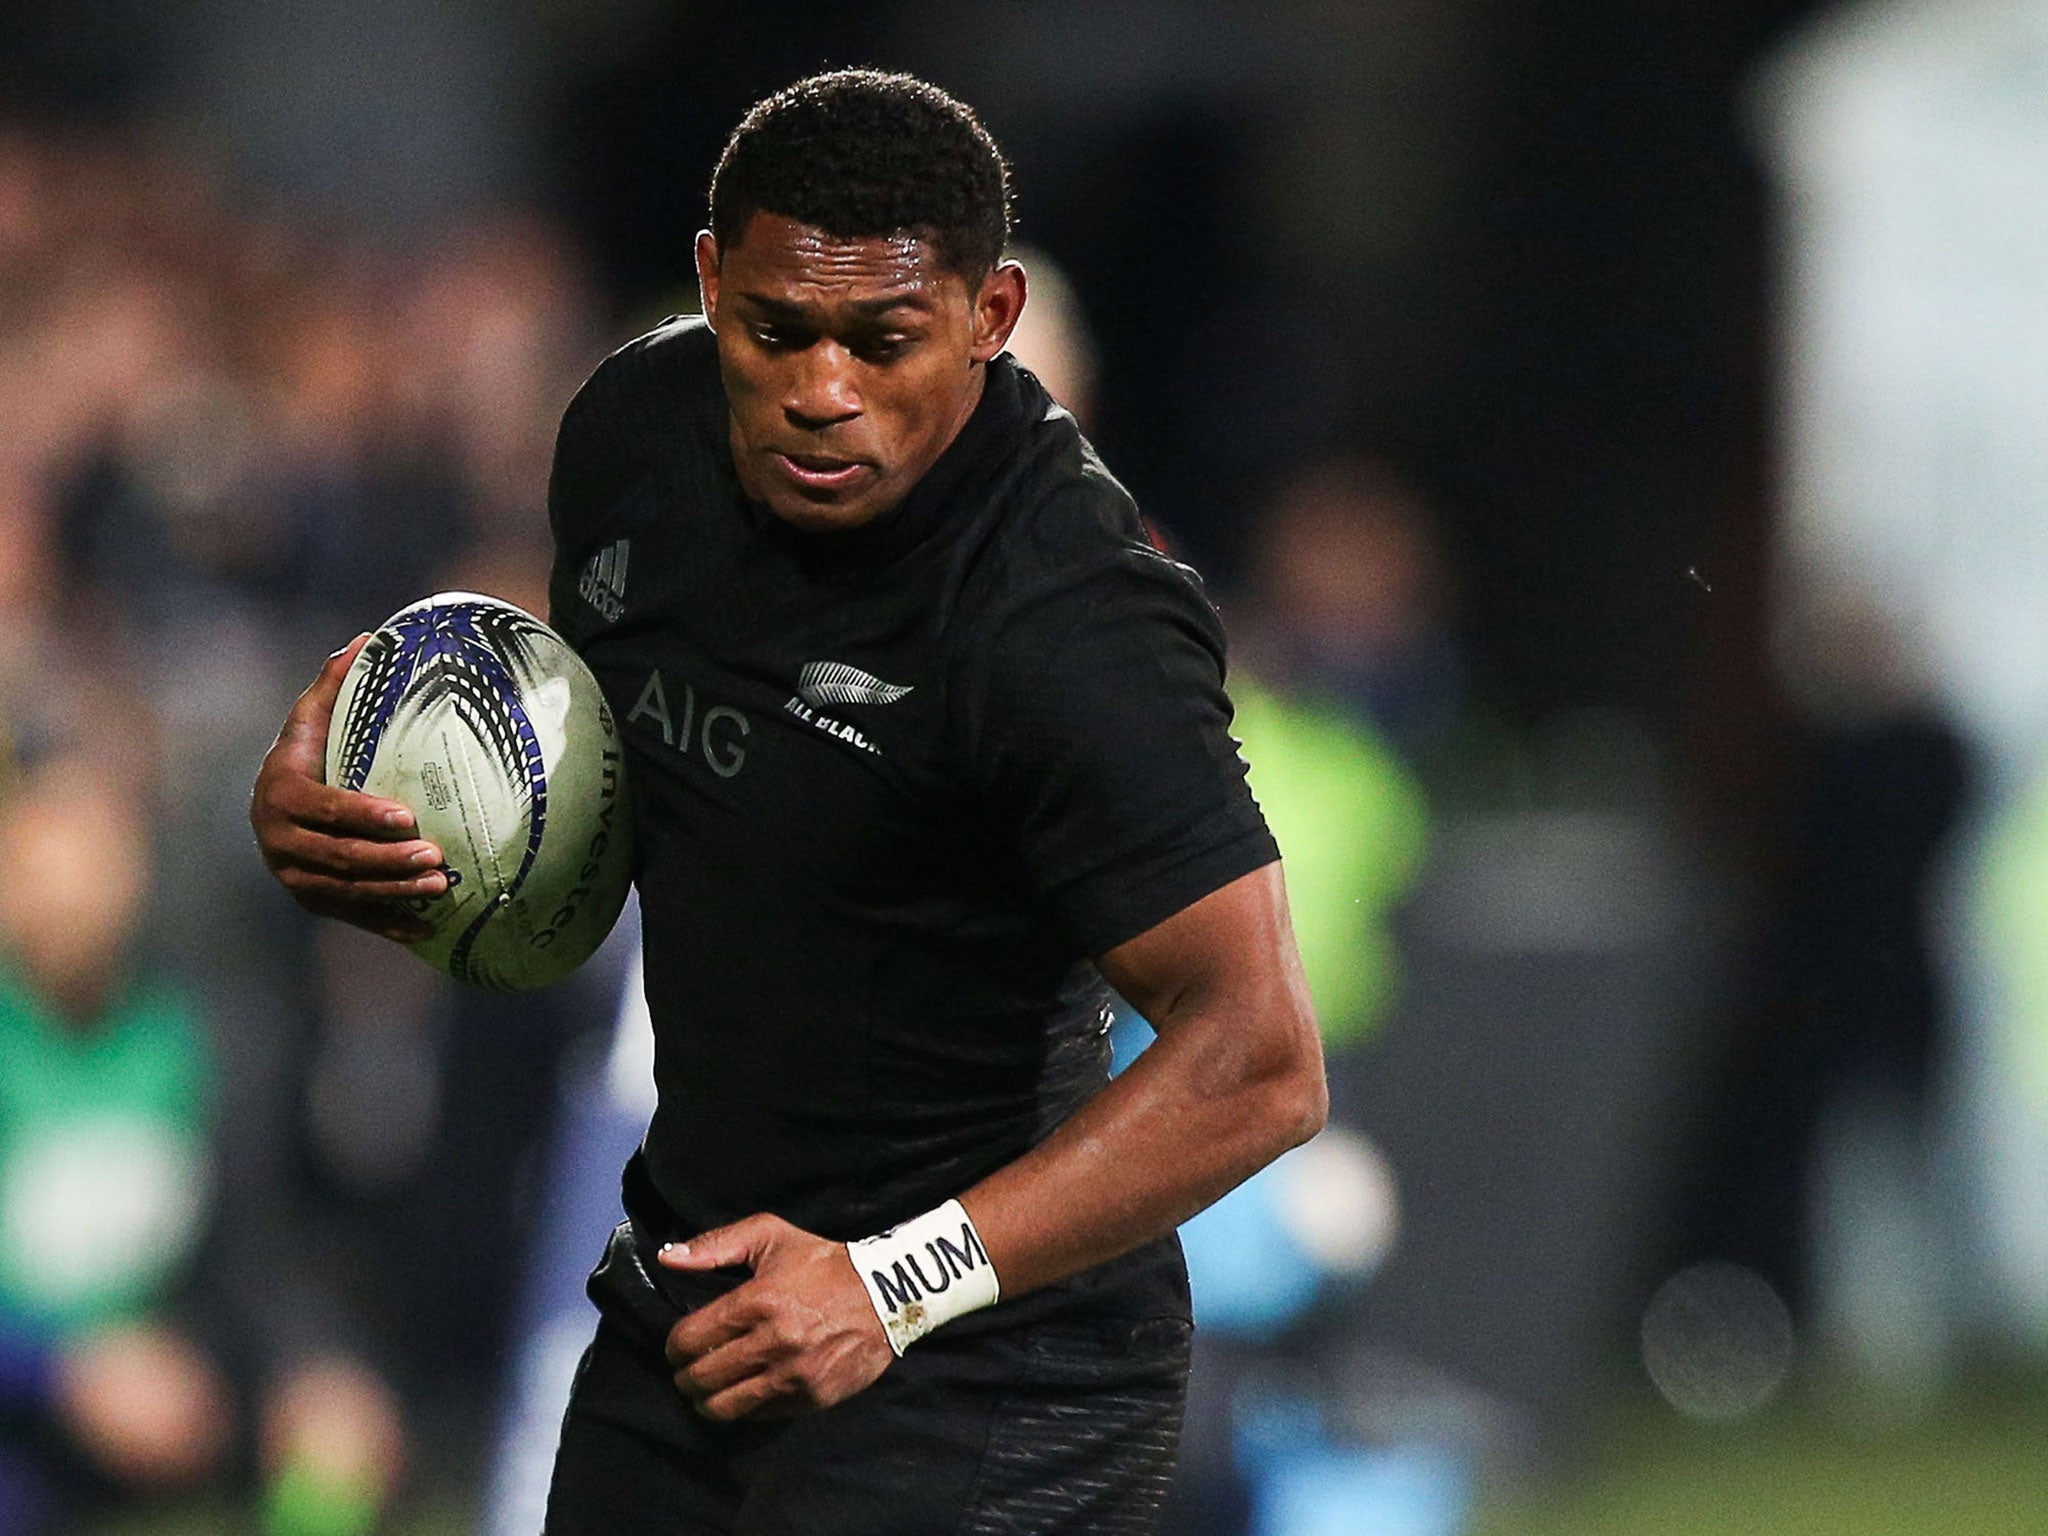 Waisake Naholo suffered a fractured leg on his debut